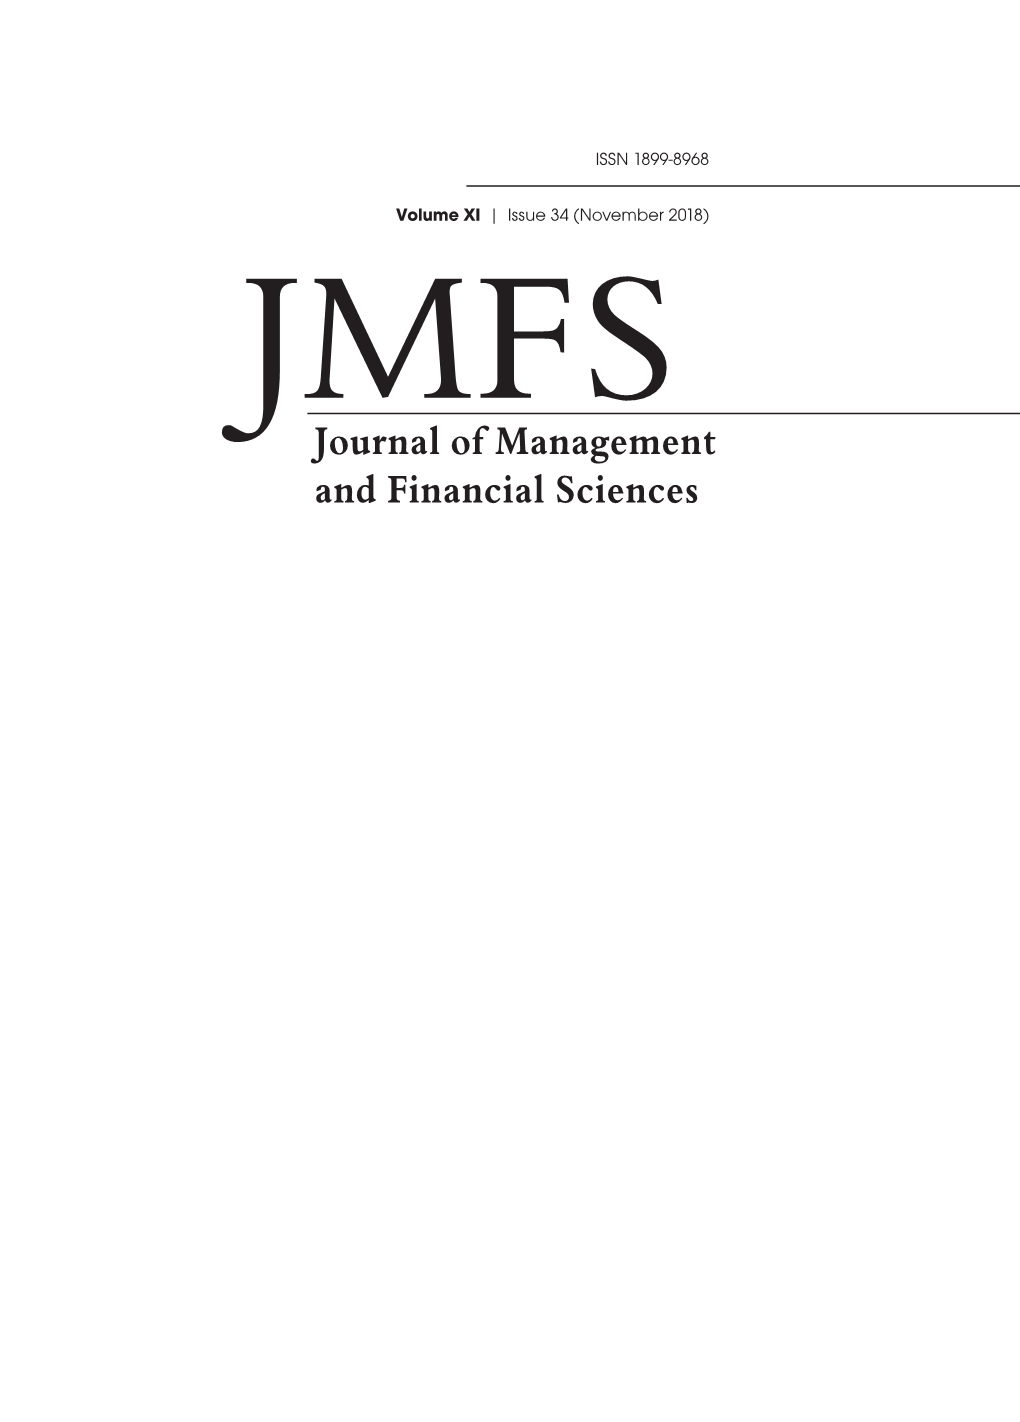 Journal of Management and Financial Sciences